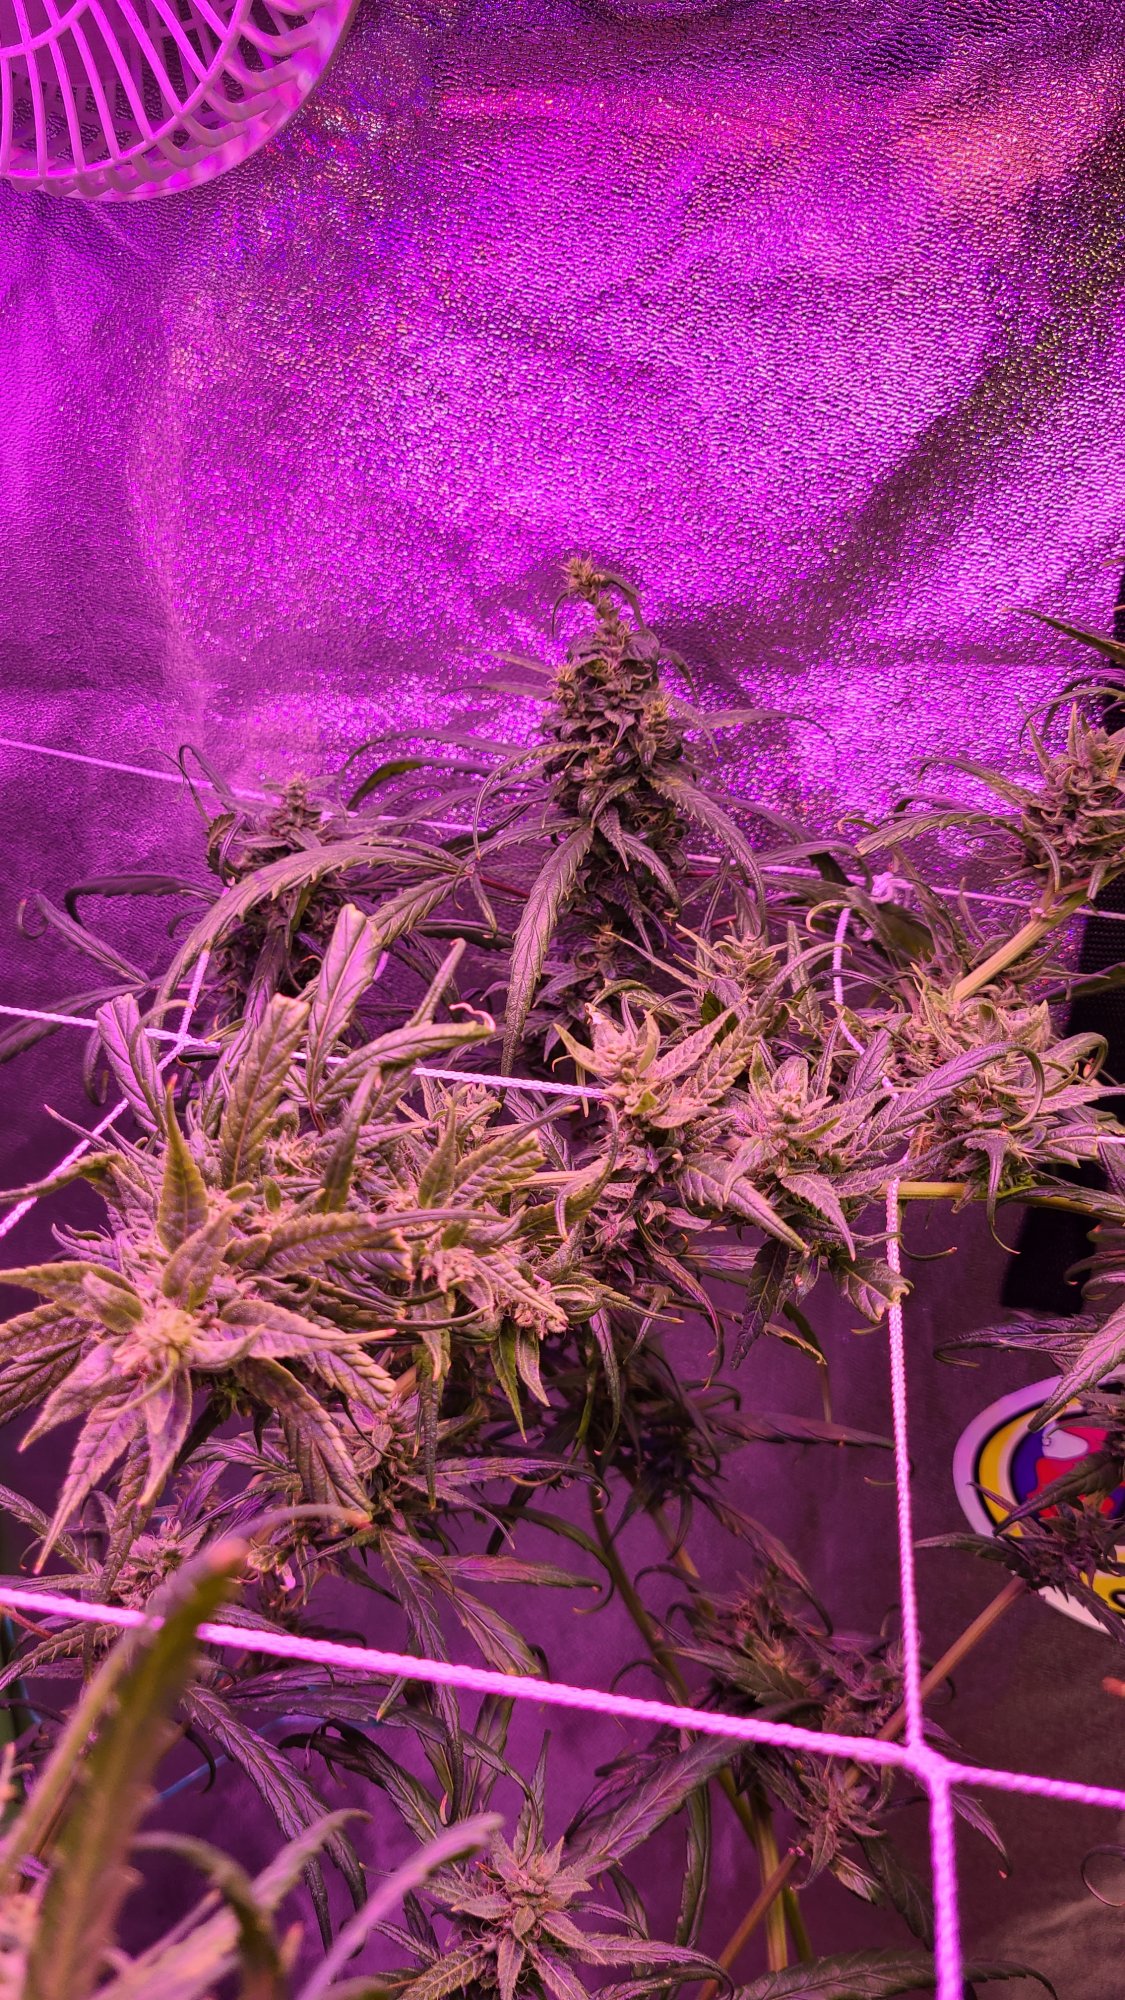 Thin curling leaves day 36 of flower 3